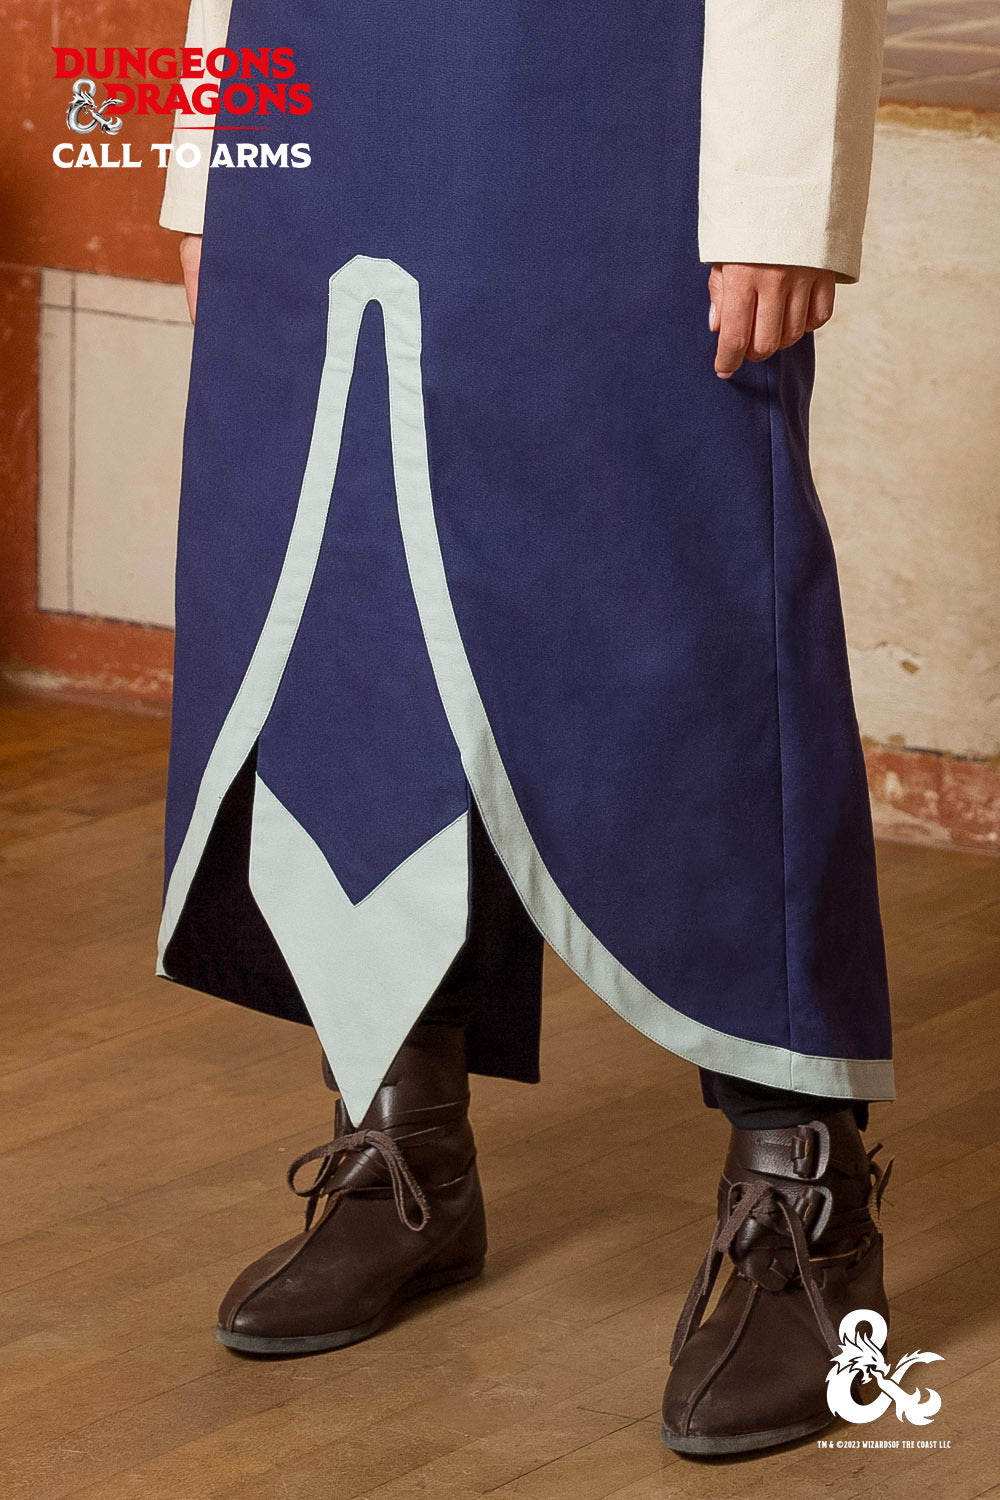 Dungeons & Dragons Cleric Tabard Blue/Ice Blue